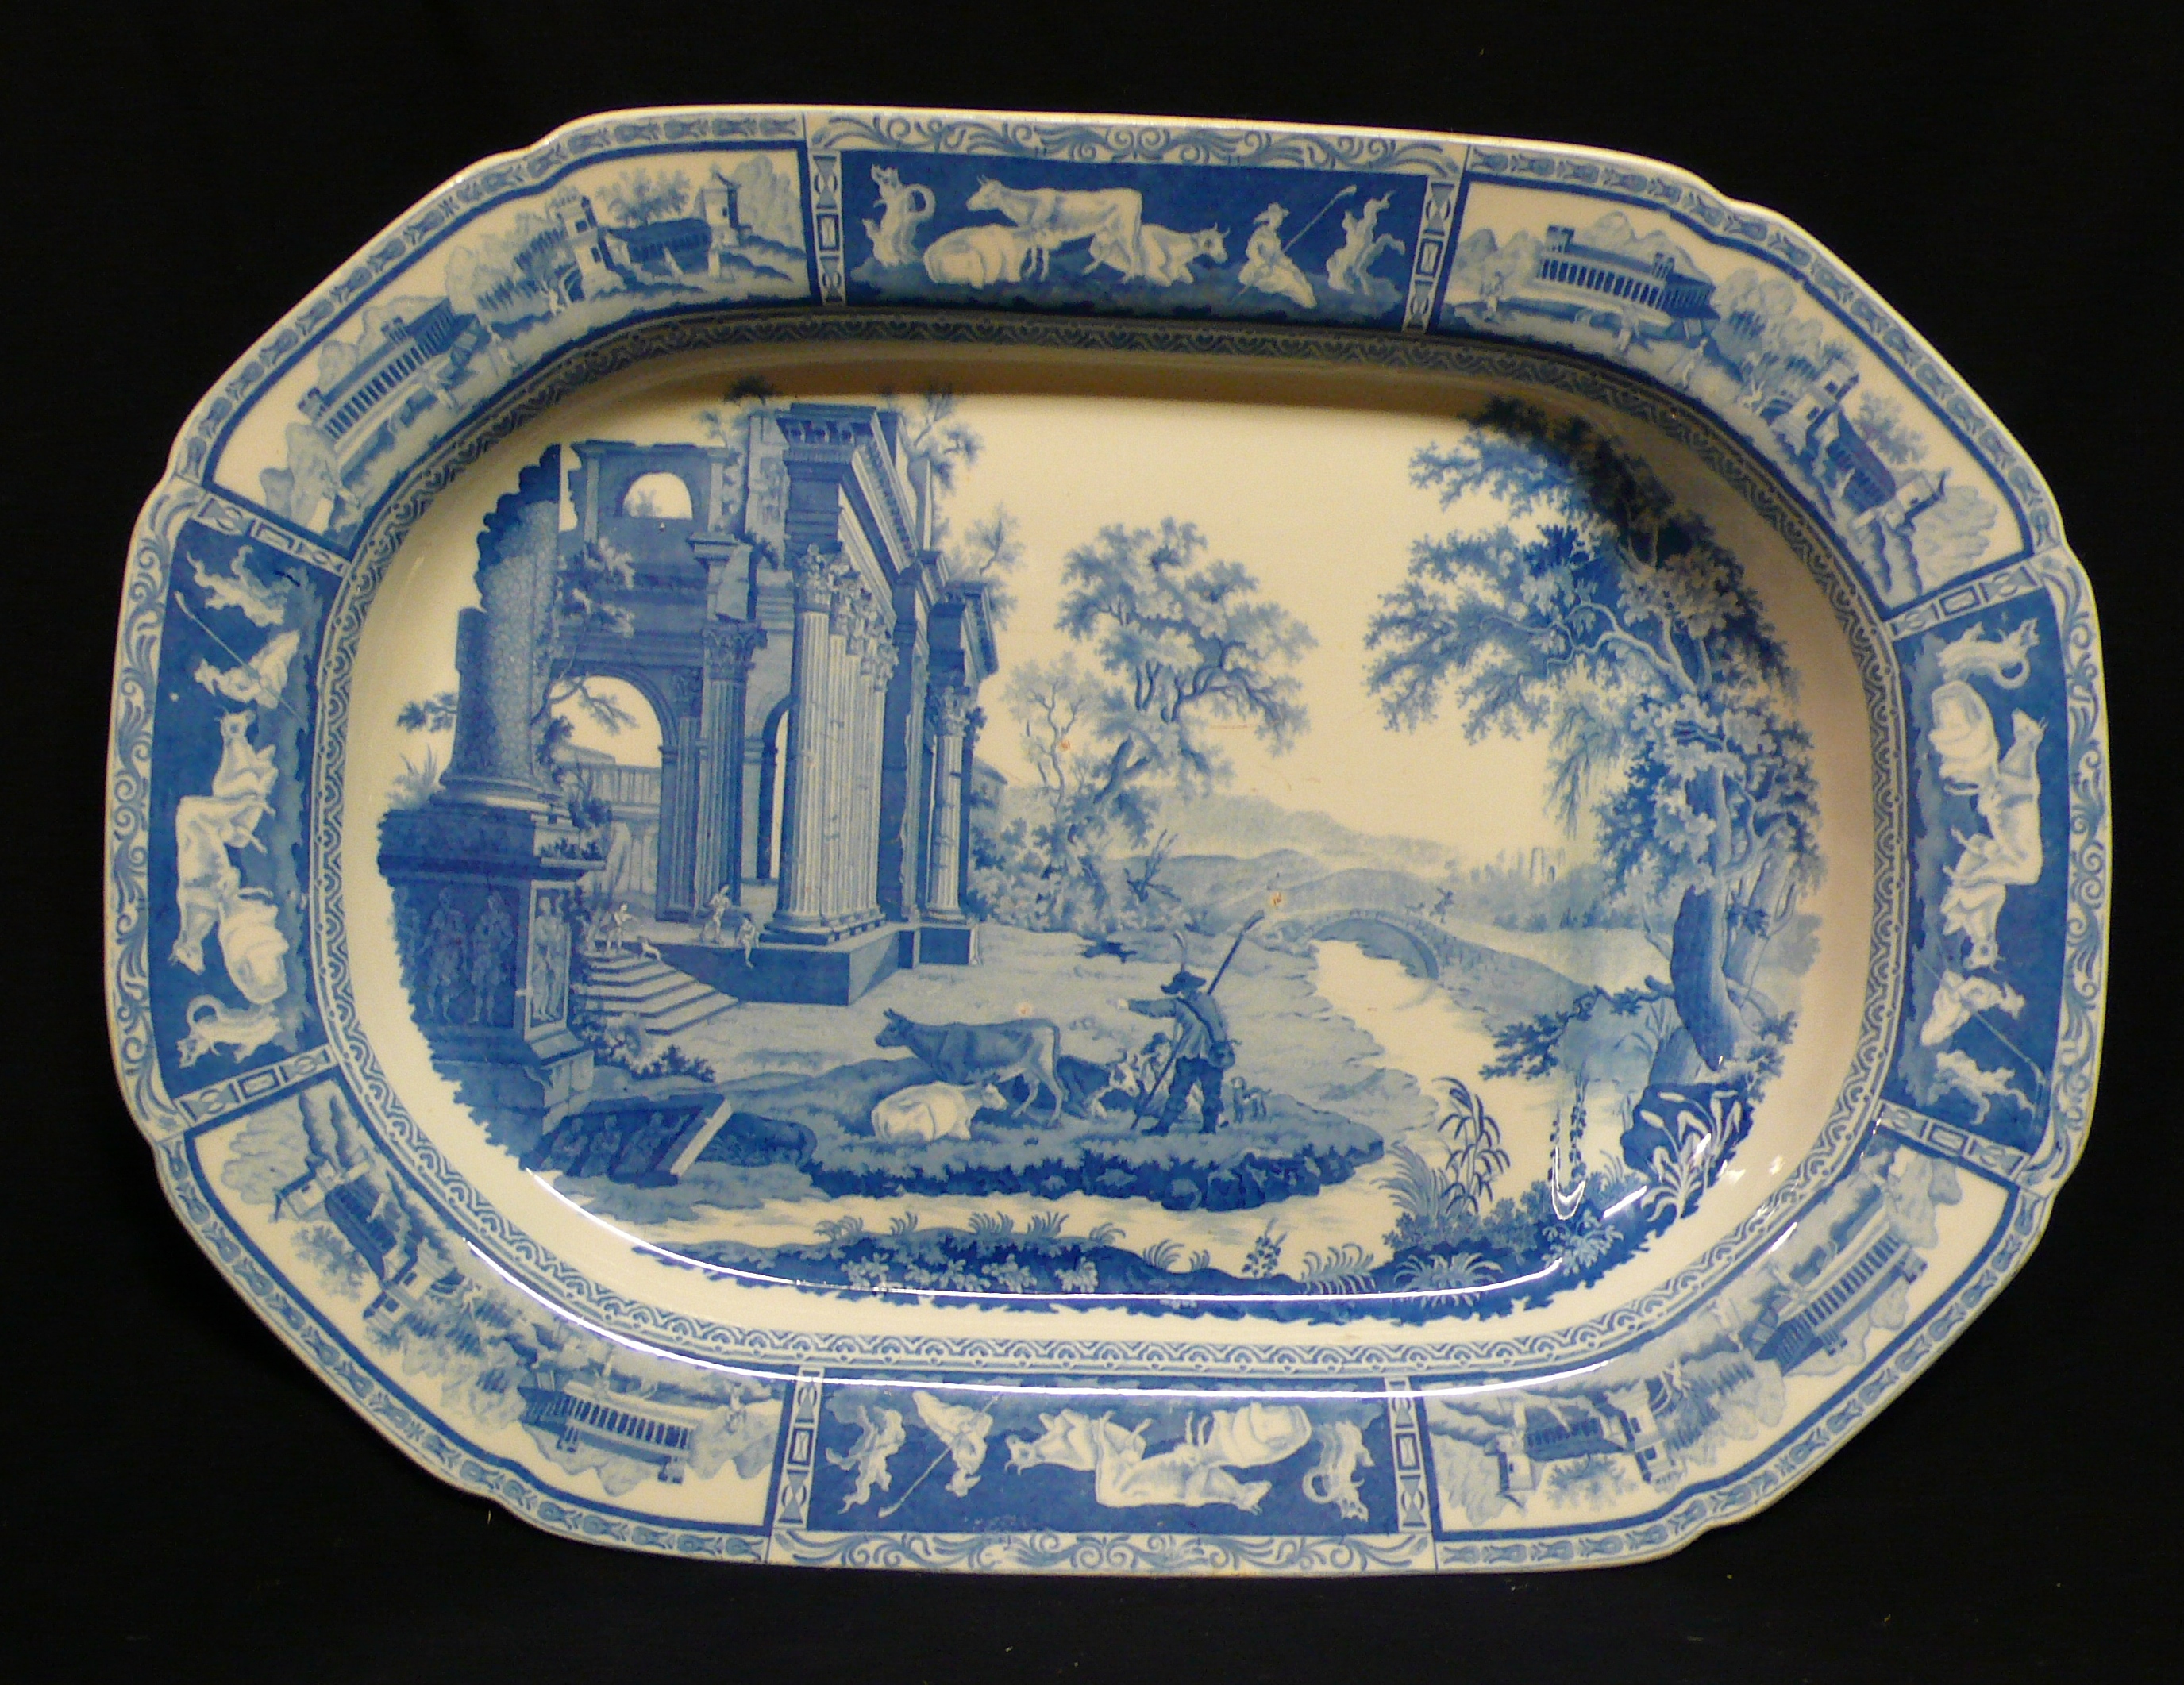 A large meat dish with gravy well, by Benjamin Adams of Greengates, Tunstall, said to have been